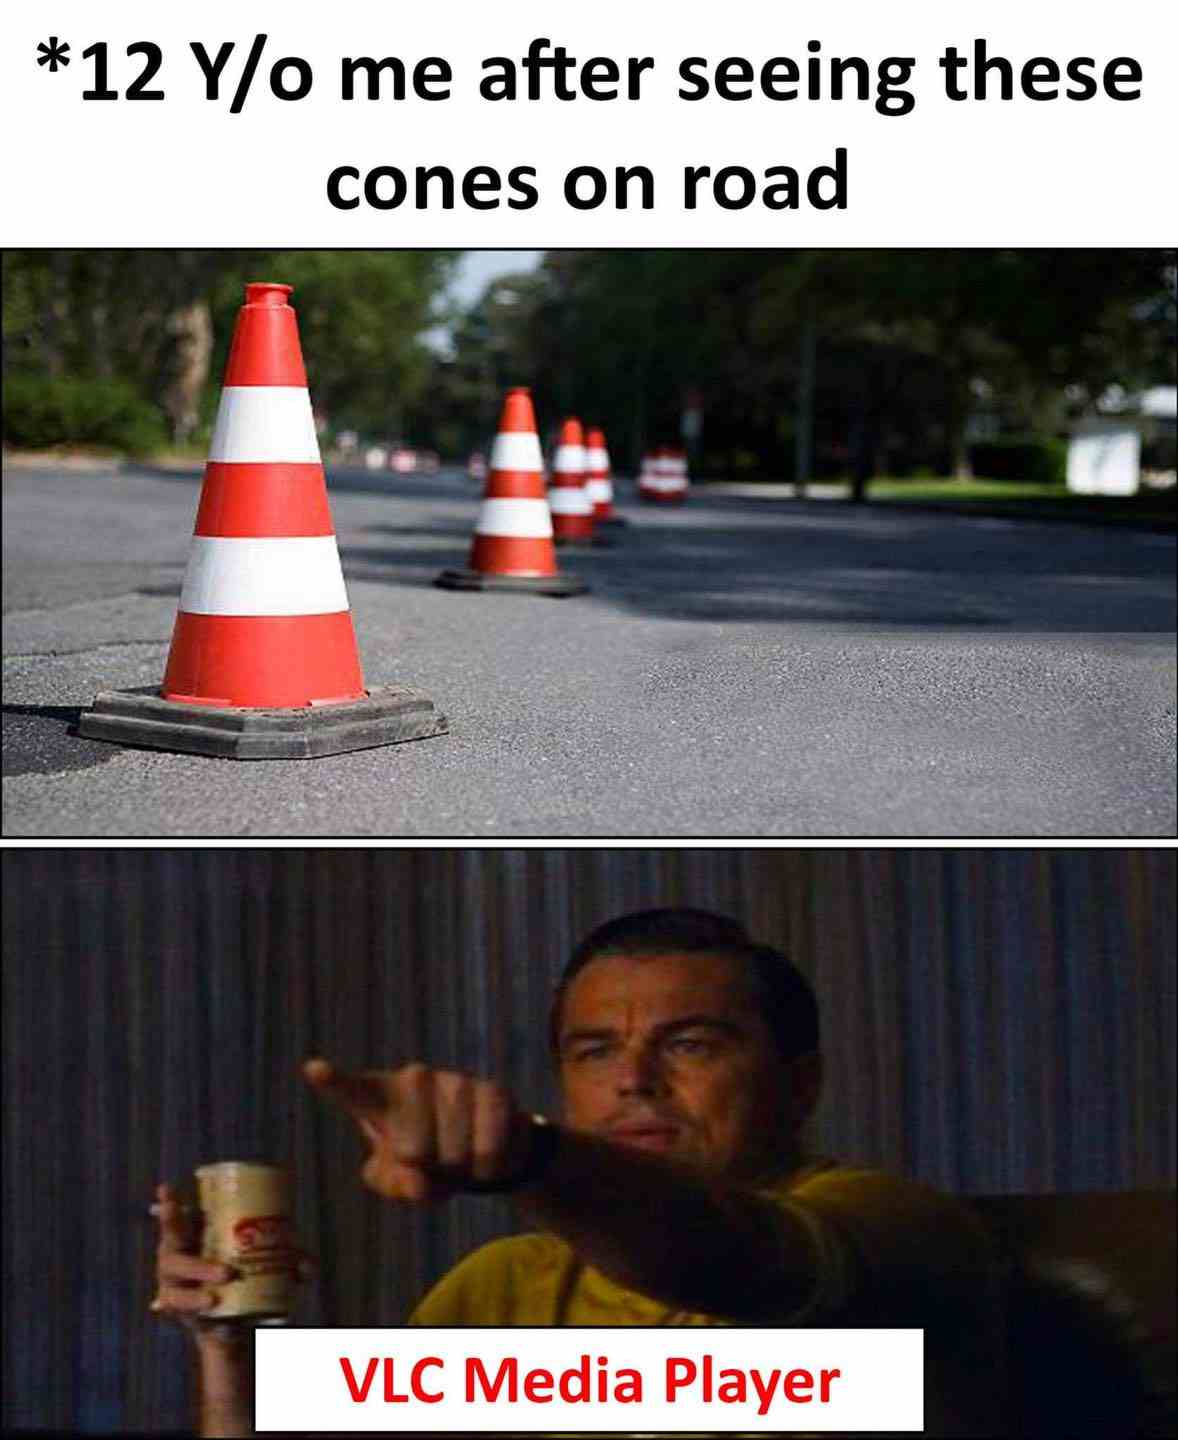 12 Y/o me after seeing these cones on road